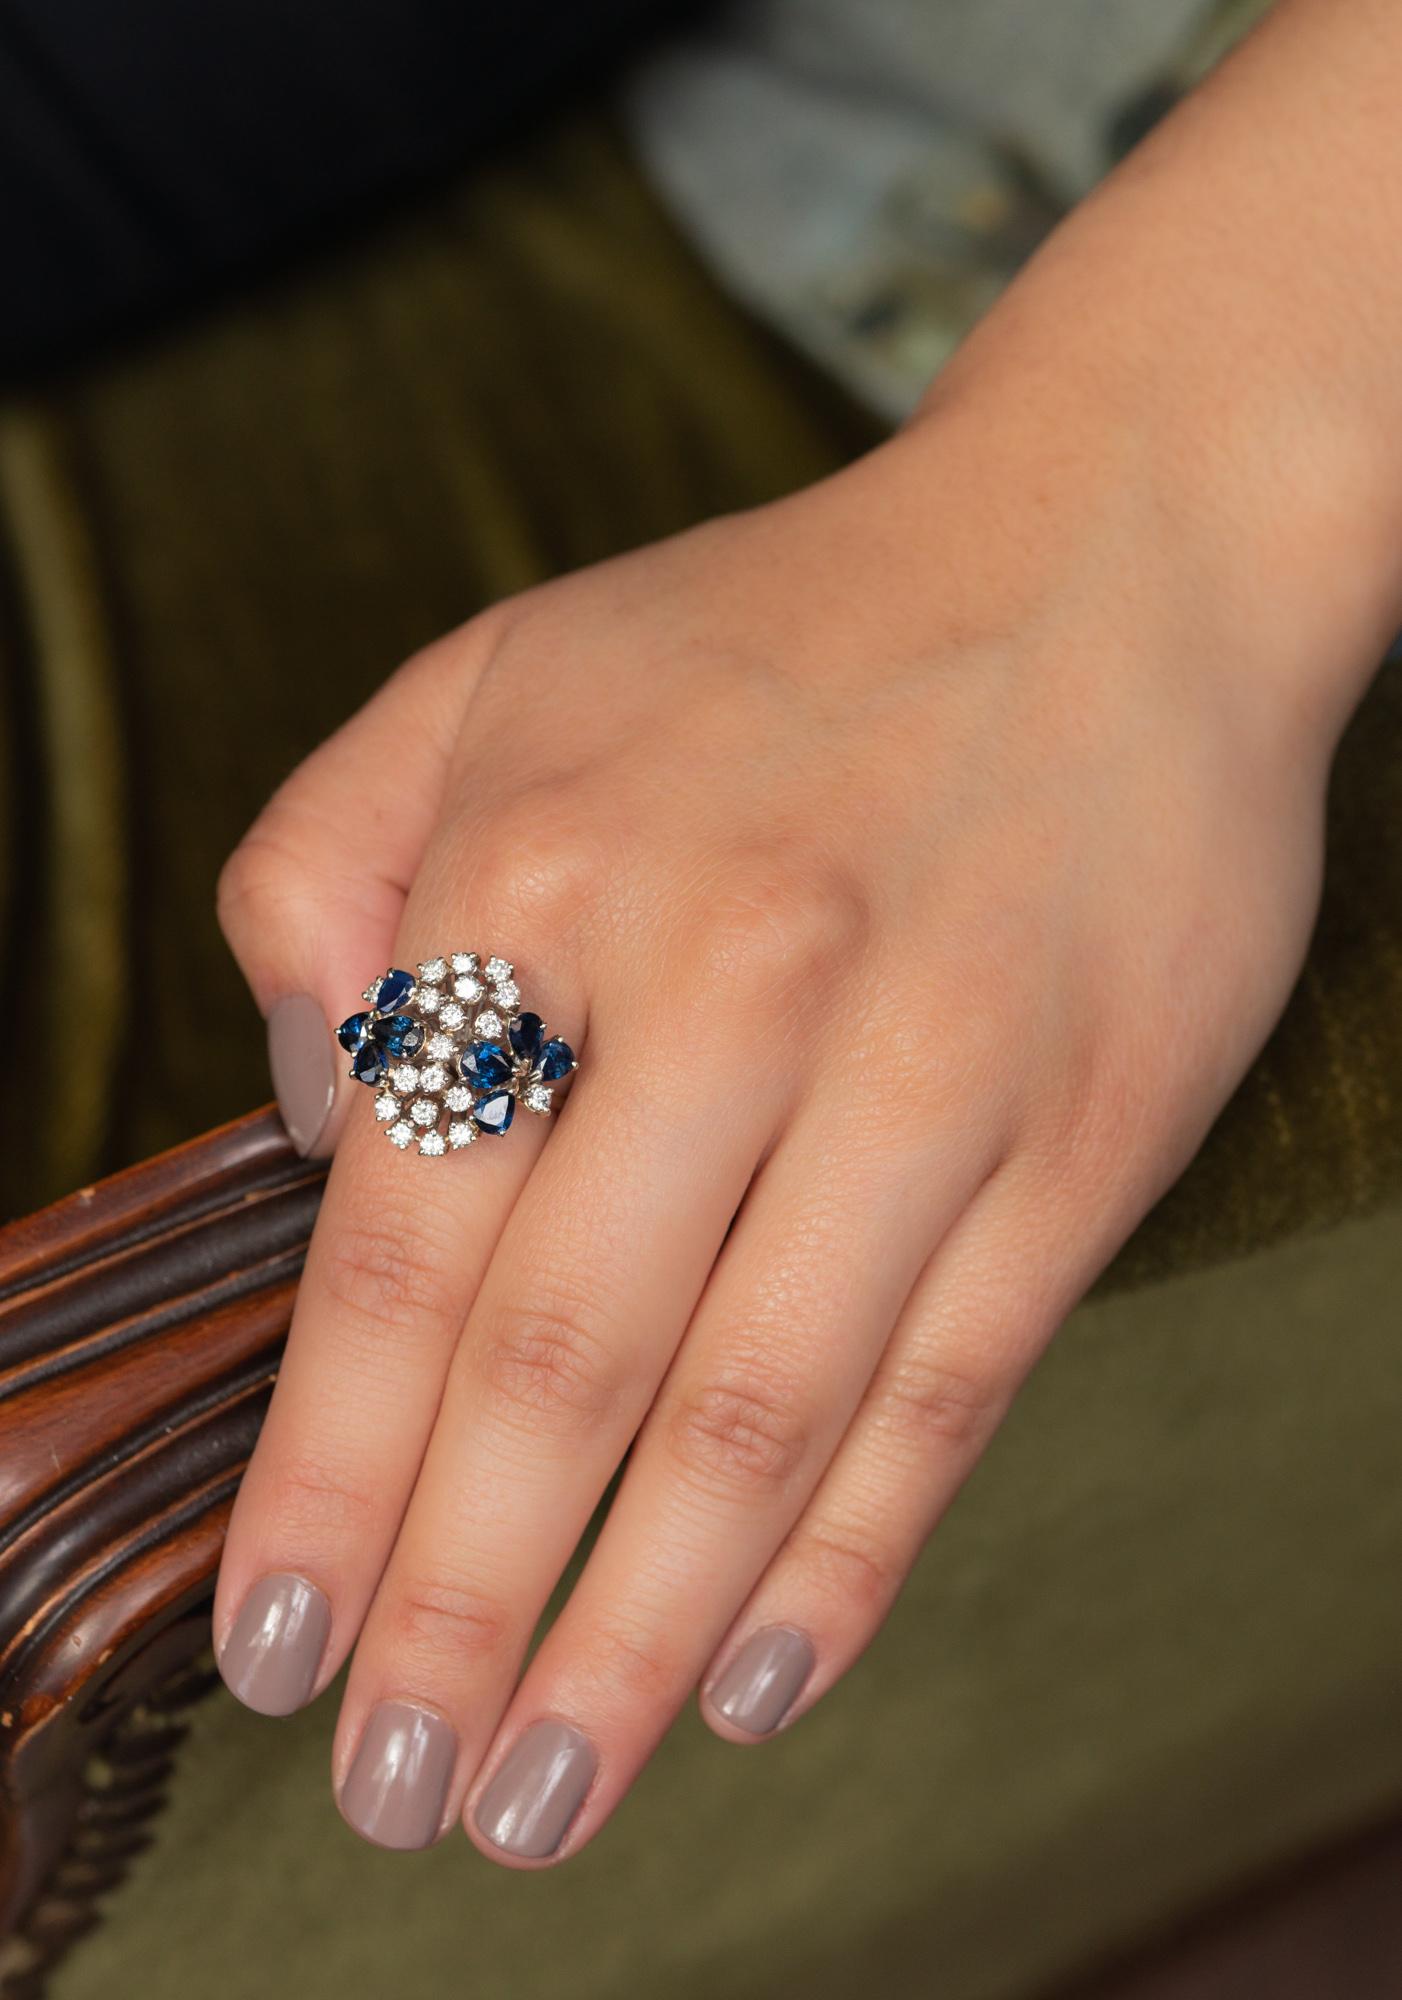 A statement diamond and sapphire ring with a whooping crown measuring 2.4 cm in diameter! 

An absolutely head-turning piece set with 19 brilliant cut diamonds of 0.1 CT each and 8 pear-shaped sapphires. The sapphires have a lovely deep-blue color